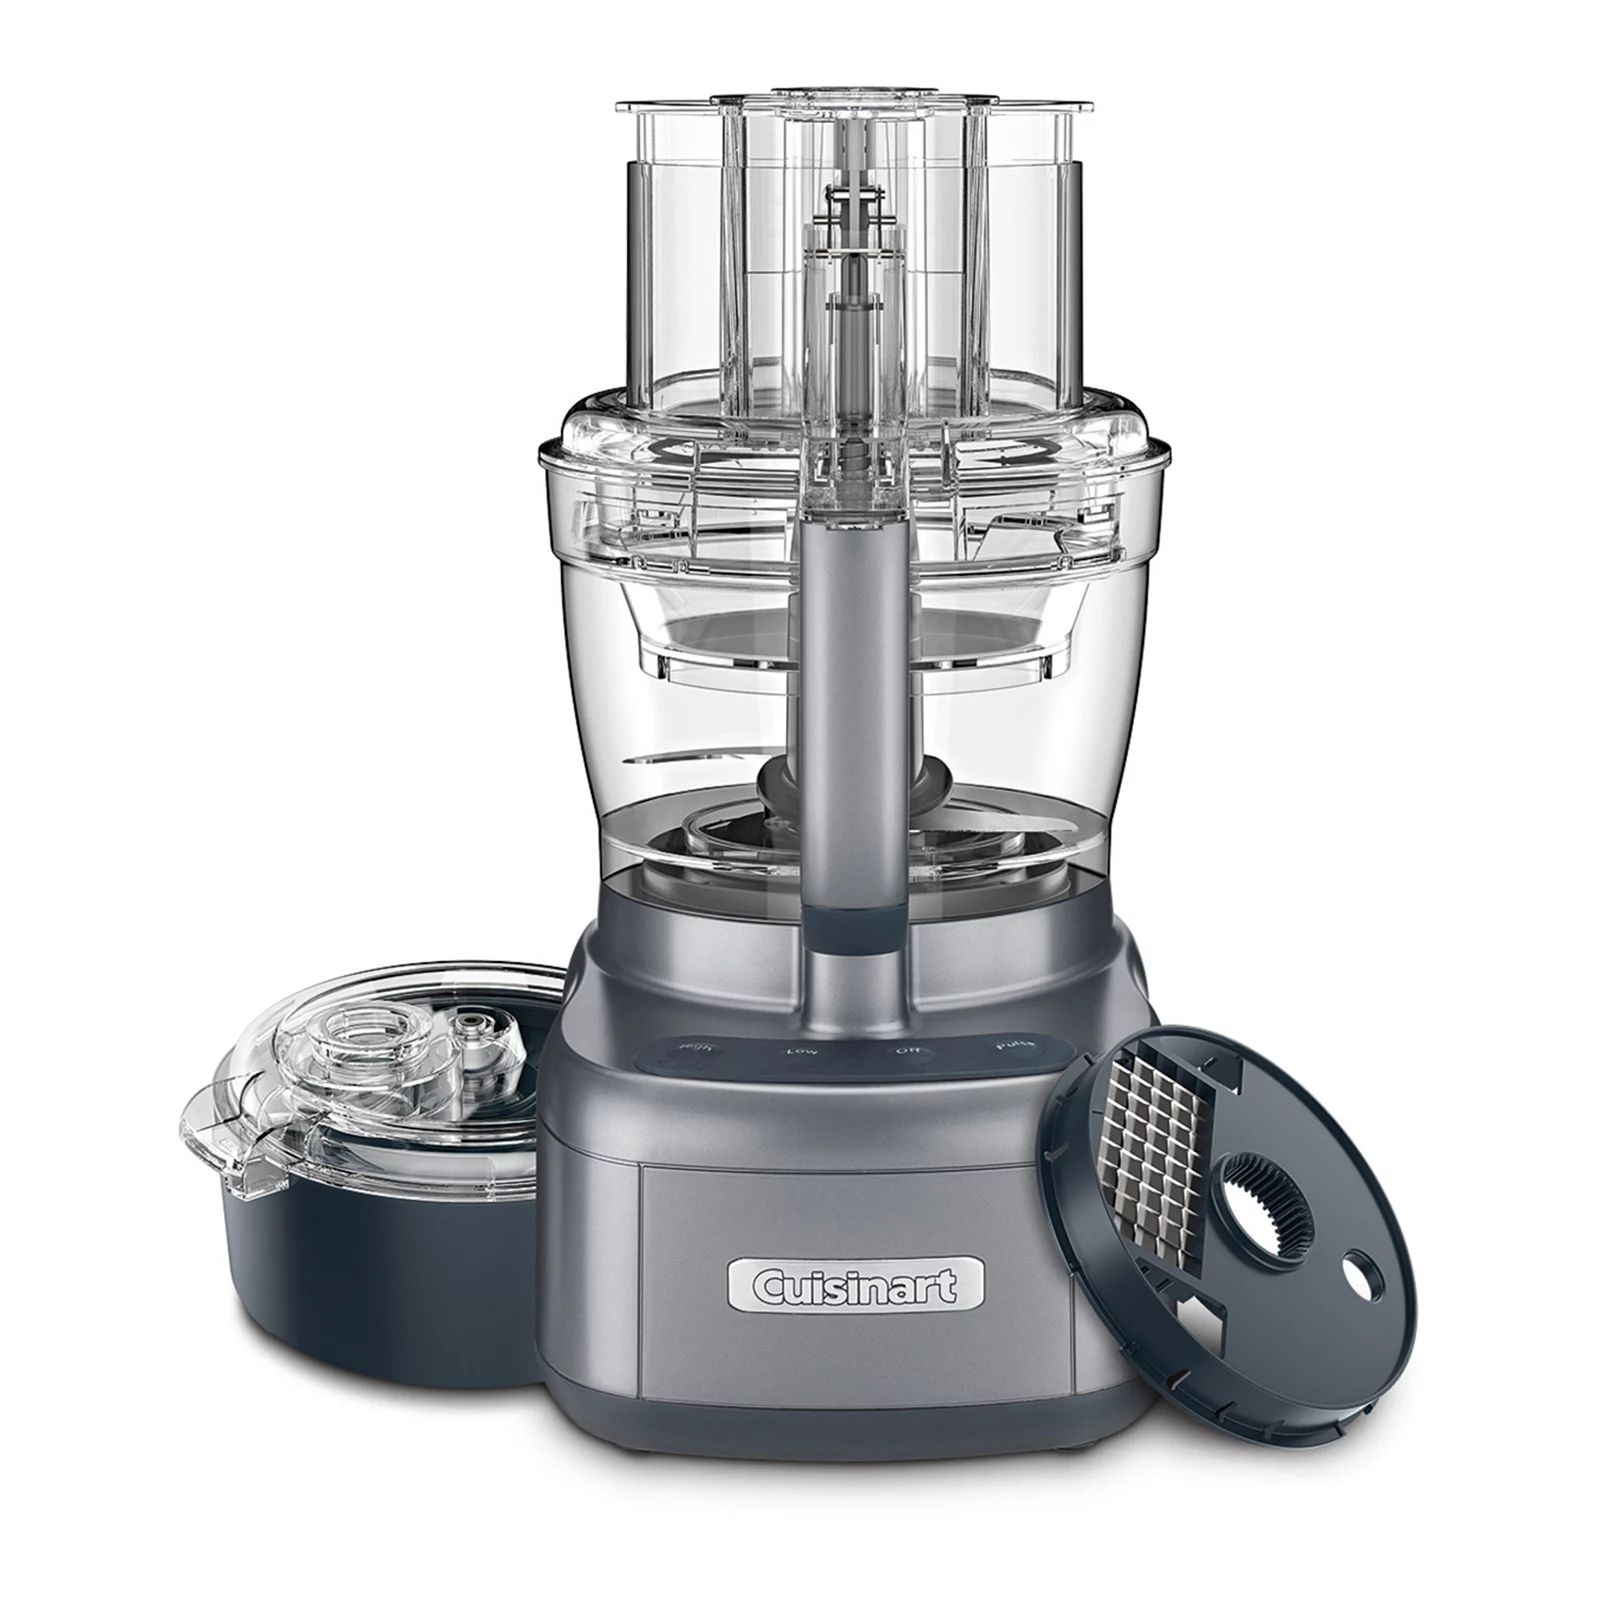 Cuisinart Elemental 13-Cup Food Processor with Dicing Kit, Grey | Kohl's